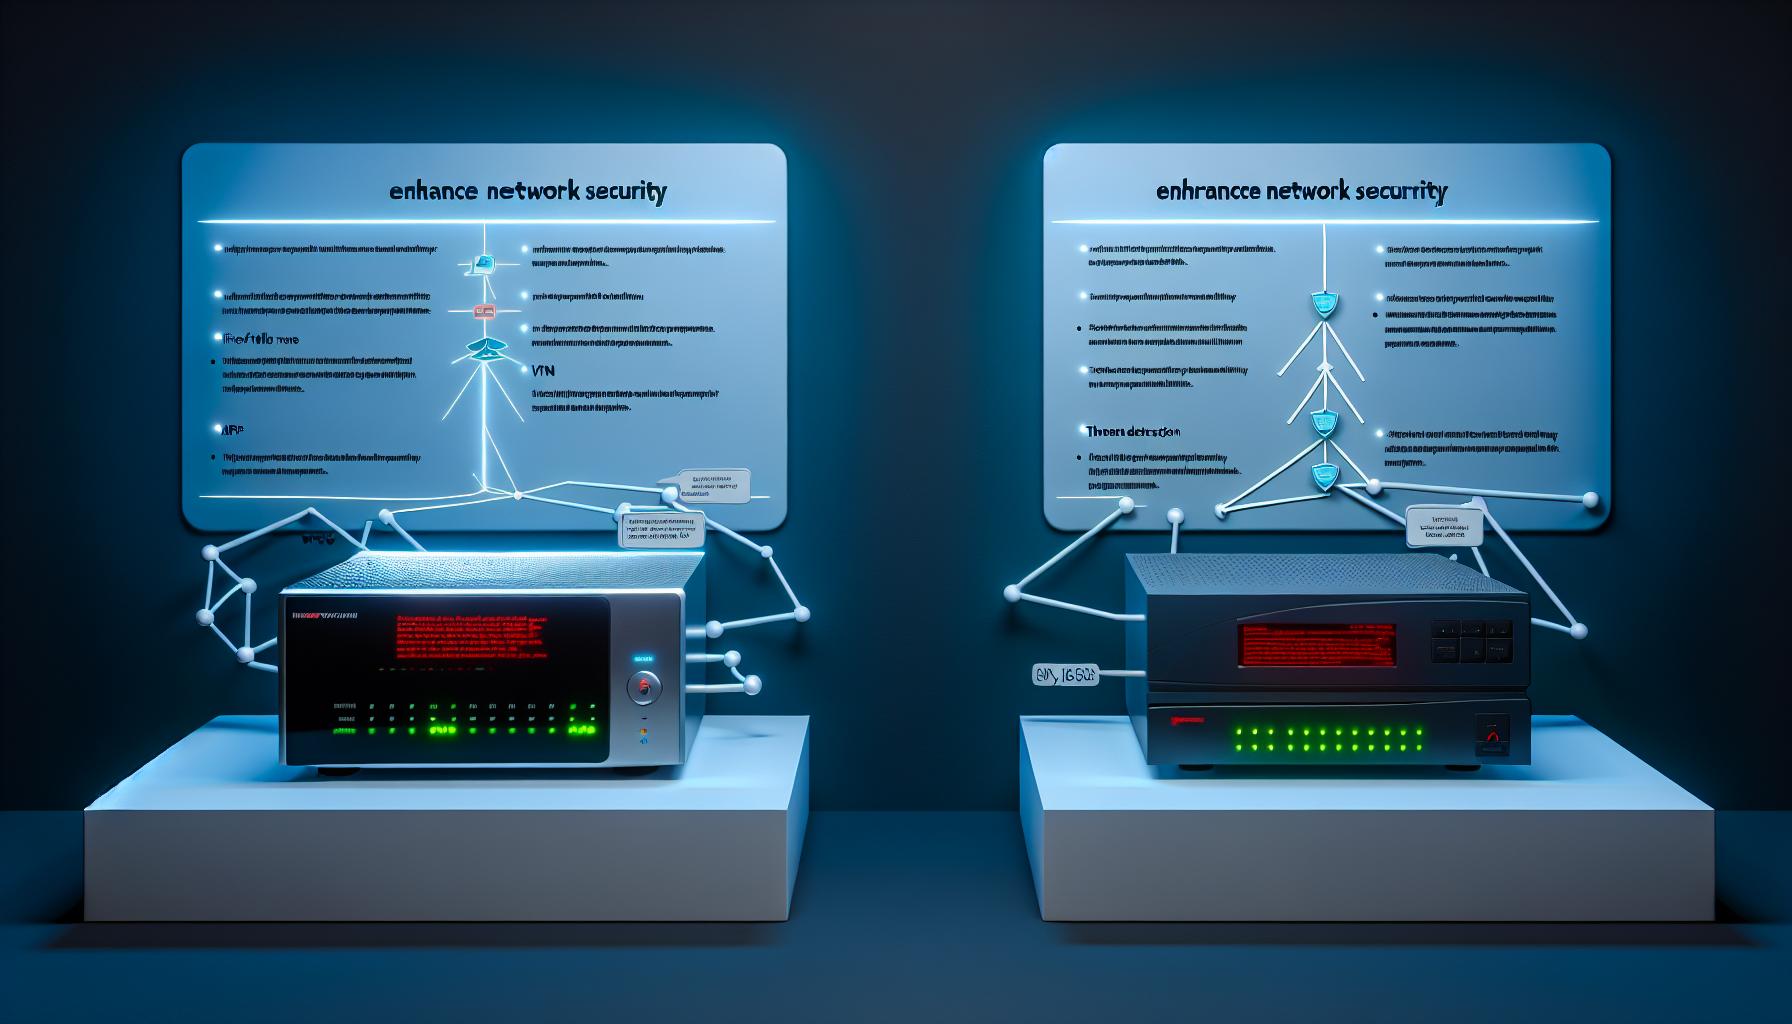 Comparing Security Appliances: Enhancing Network Security